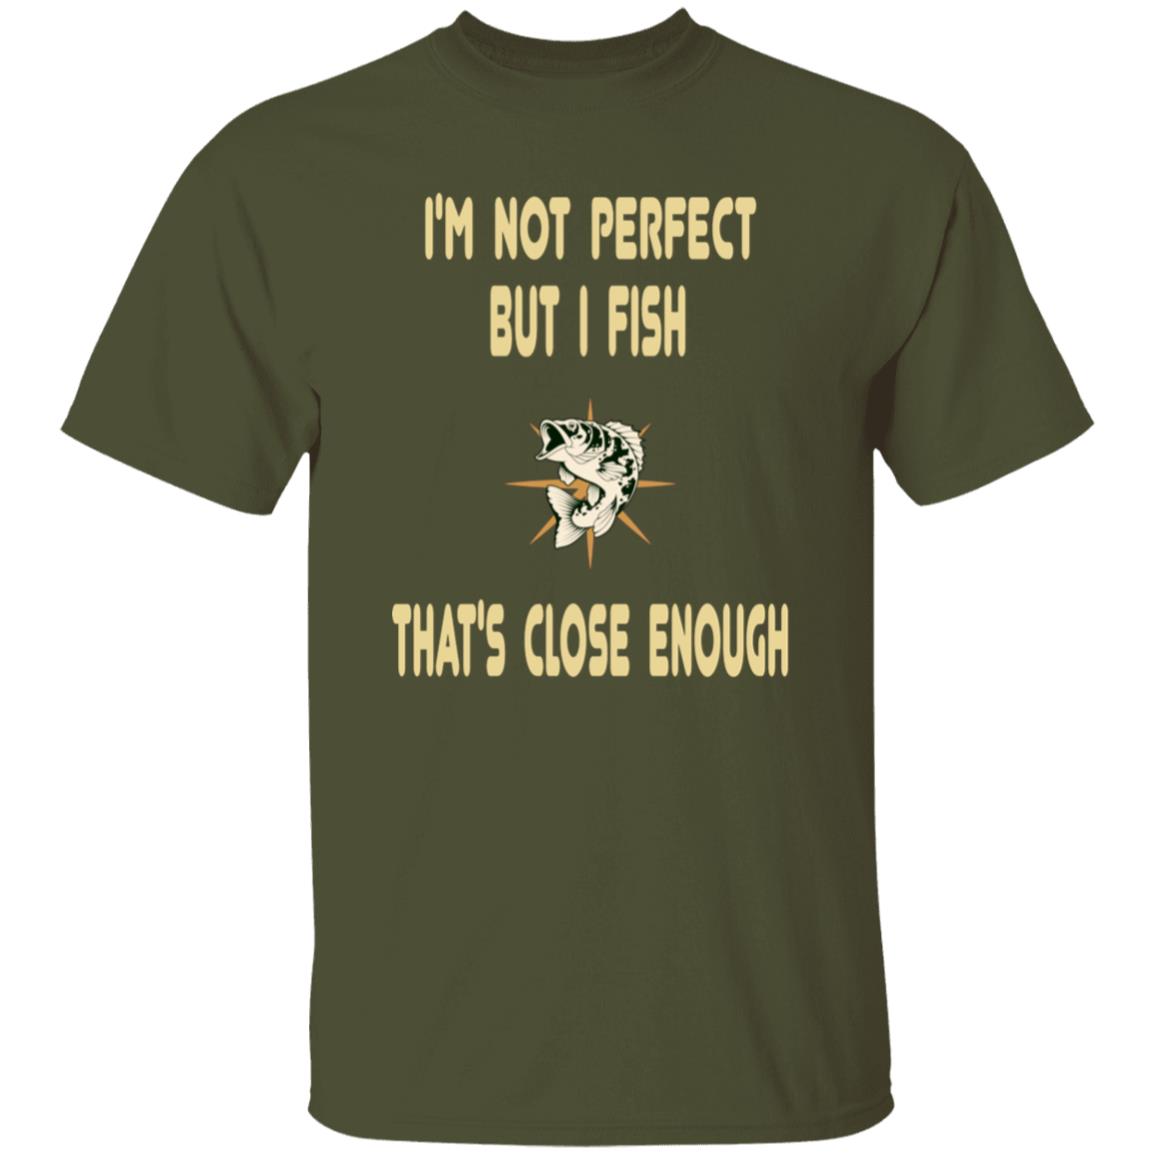 I'm not perfect but I fish that's close enough t-shirt military-green